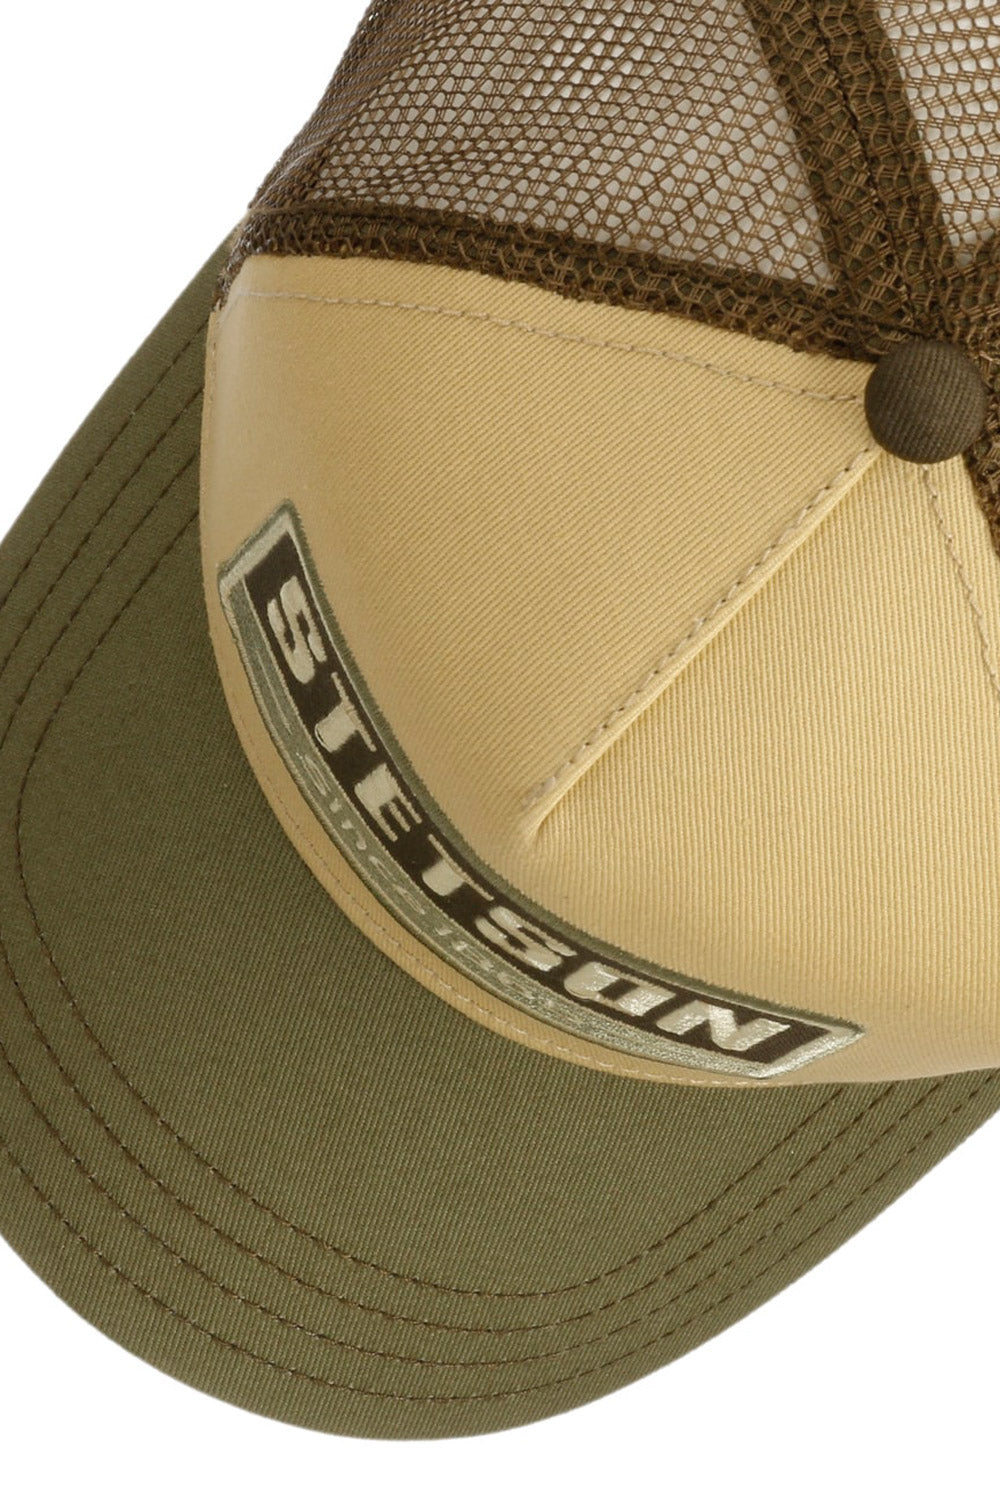 Buy the Stetson Highway Trucker Cap in Green at Intro. Spend £50 for free UK delivery. Official stockists. We ship worldwide.